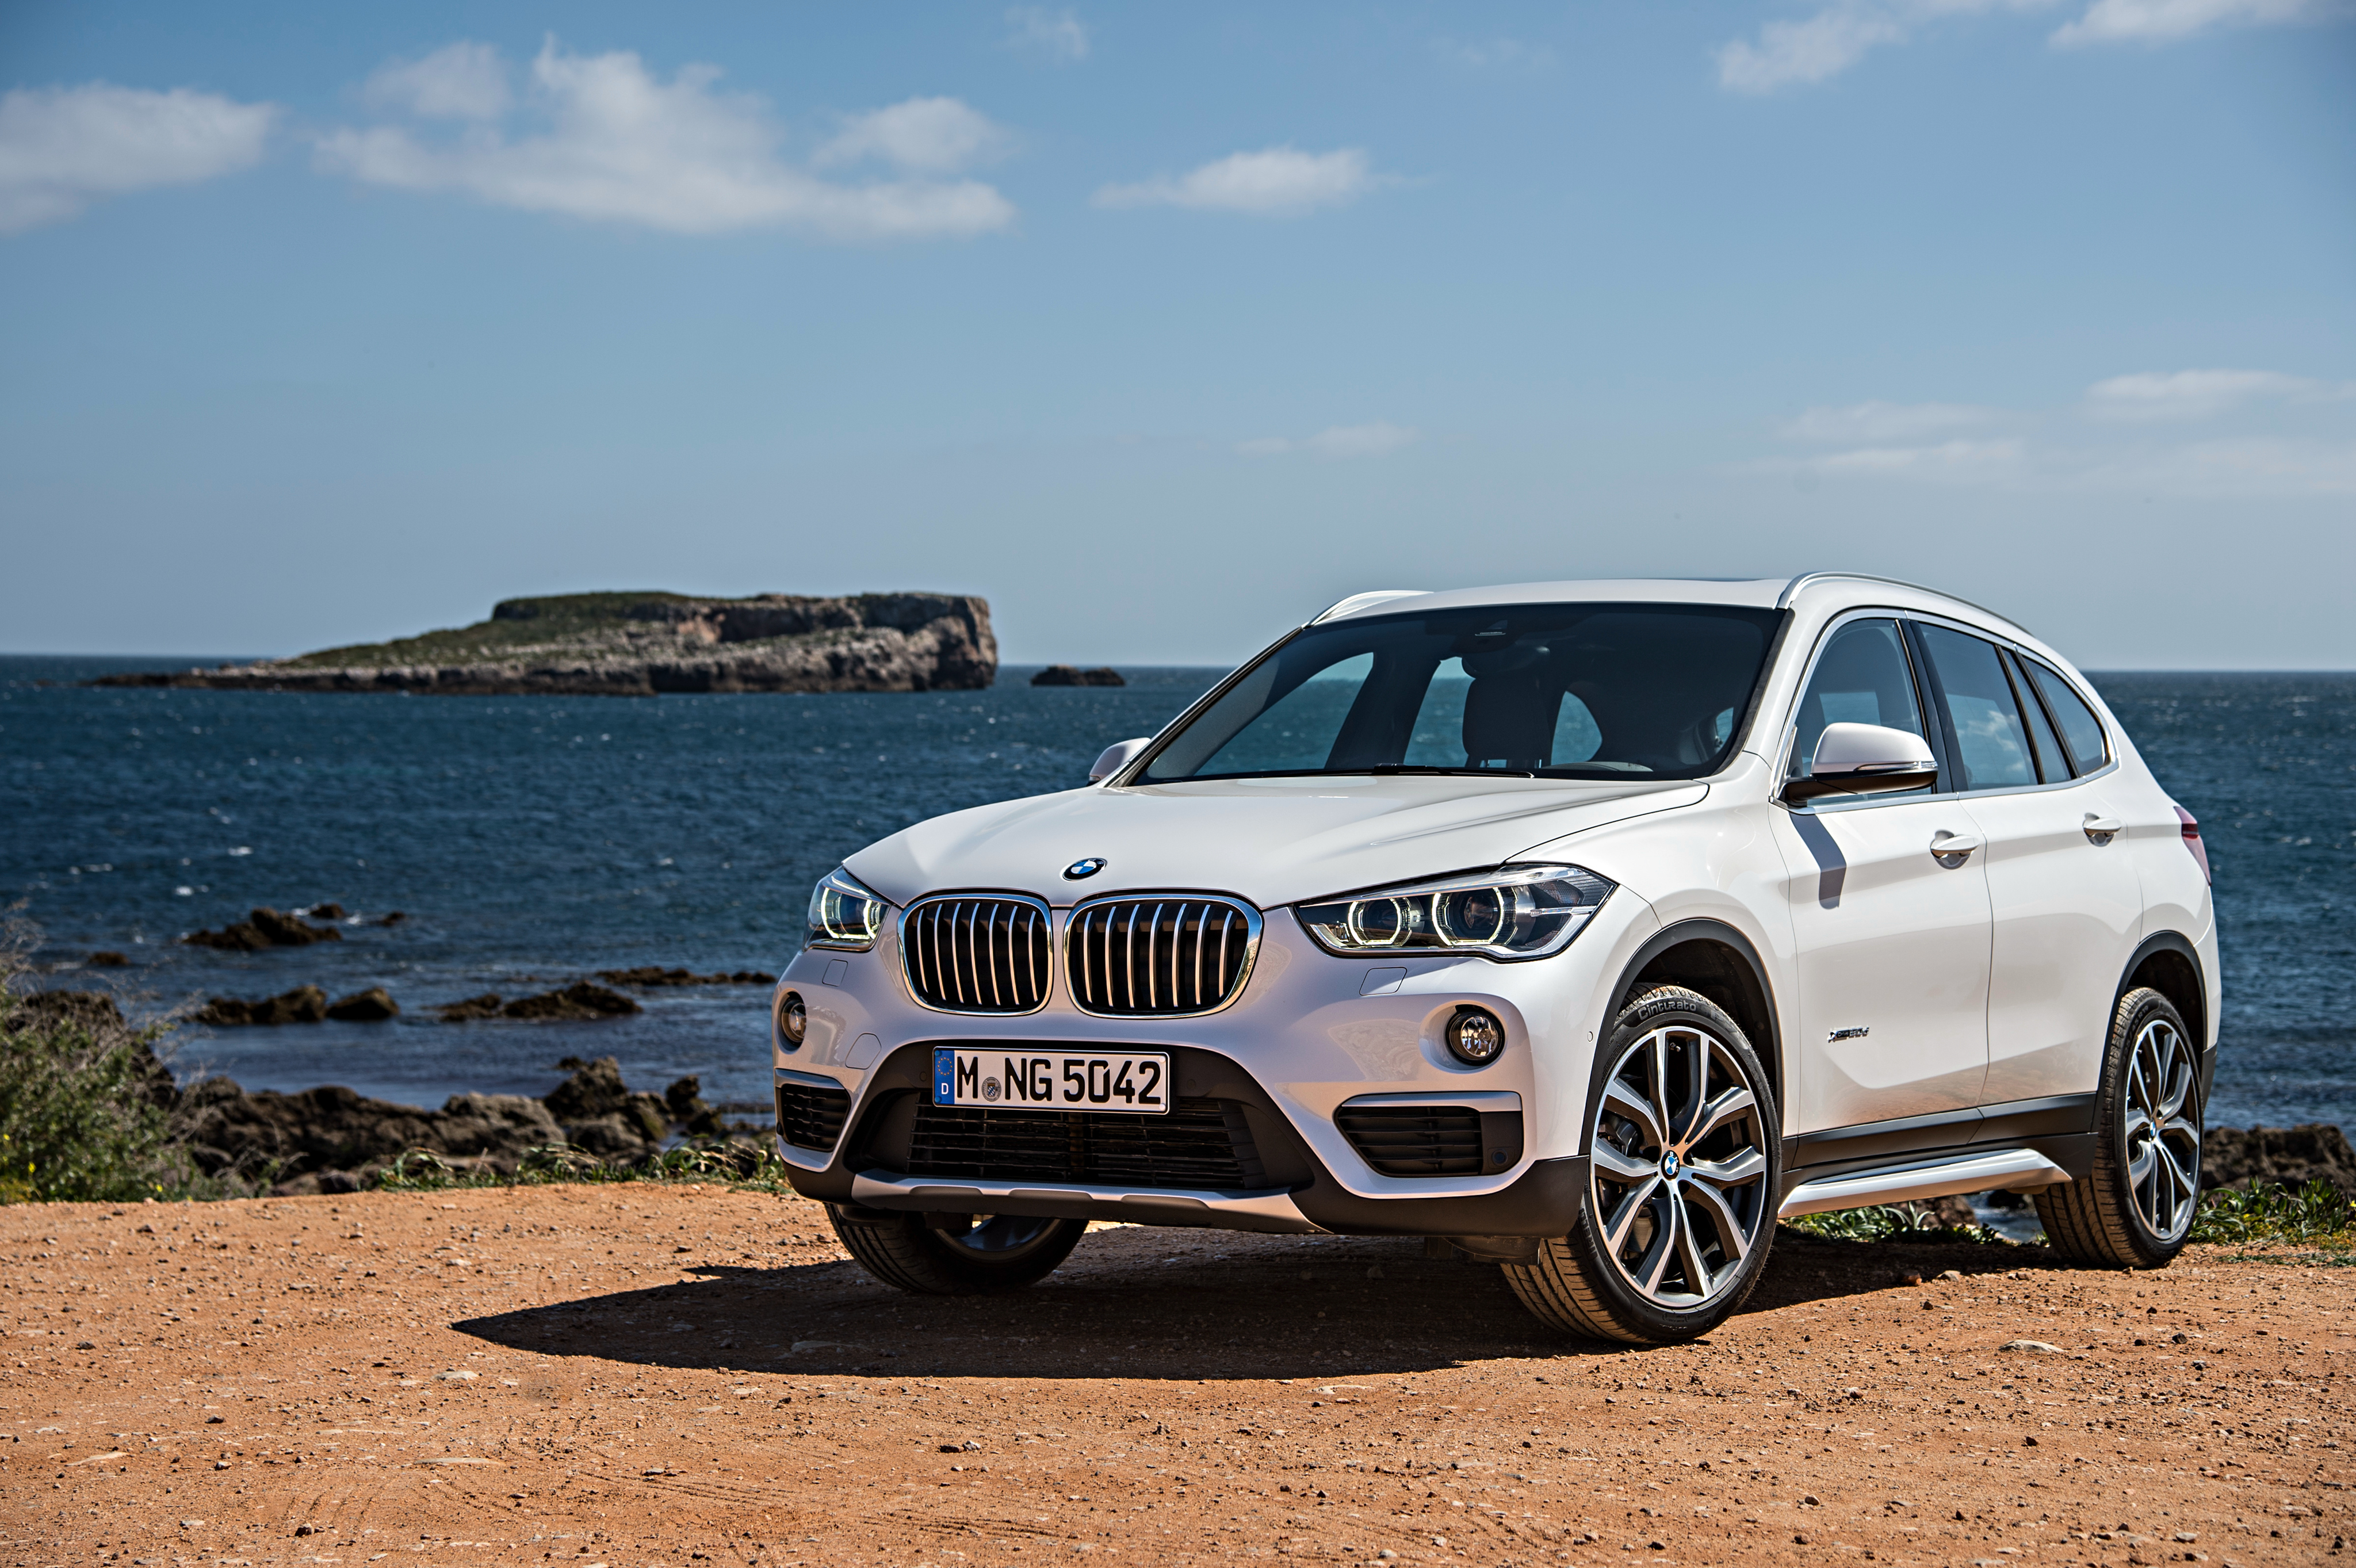 Bmw X1 On The Beach 4k Ultra HD Wallpaper Background Image